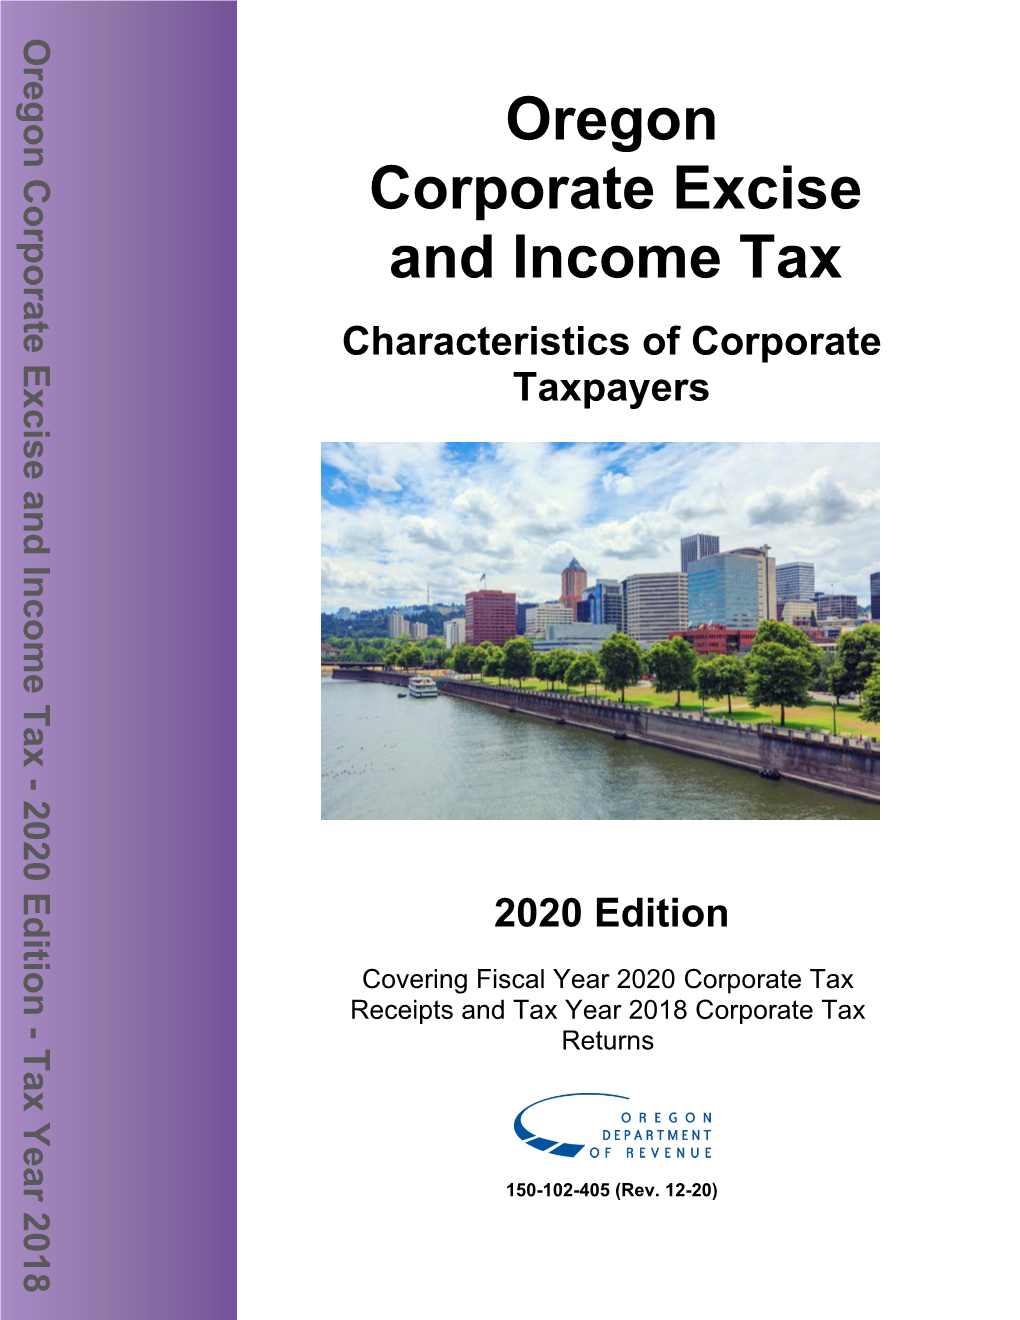 Oregon Corporate Excise and Income Tax, 150-102-405